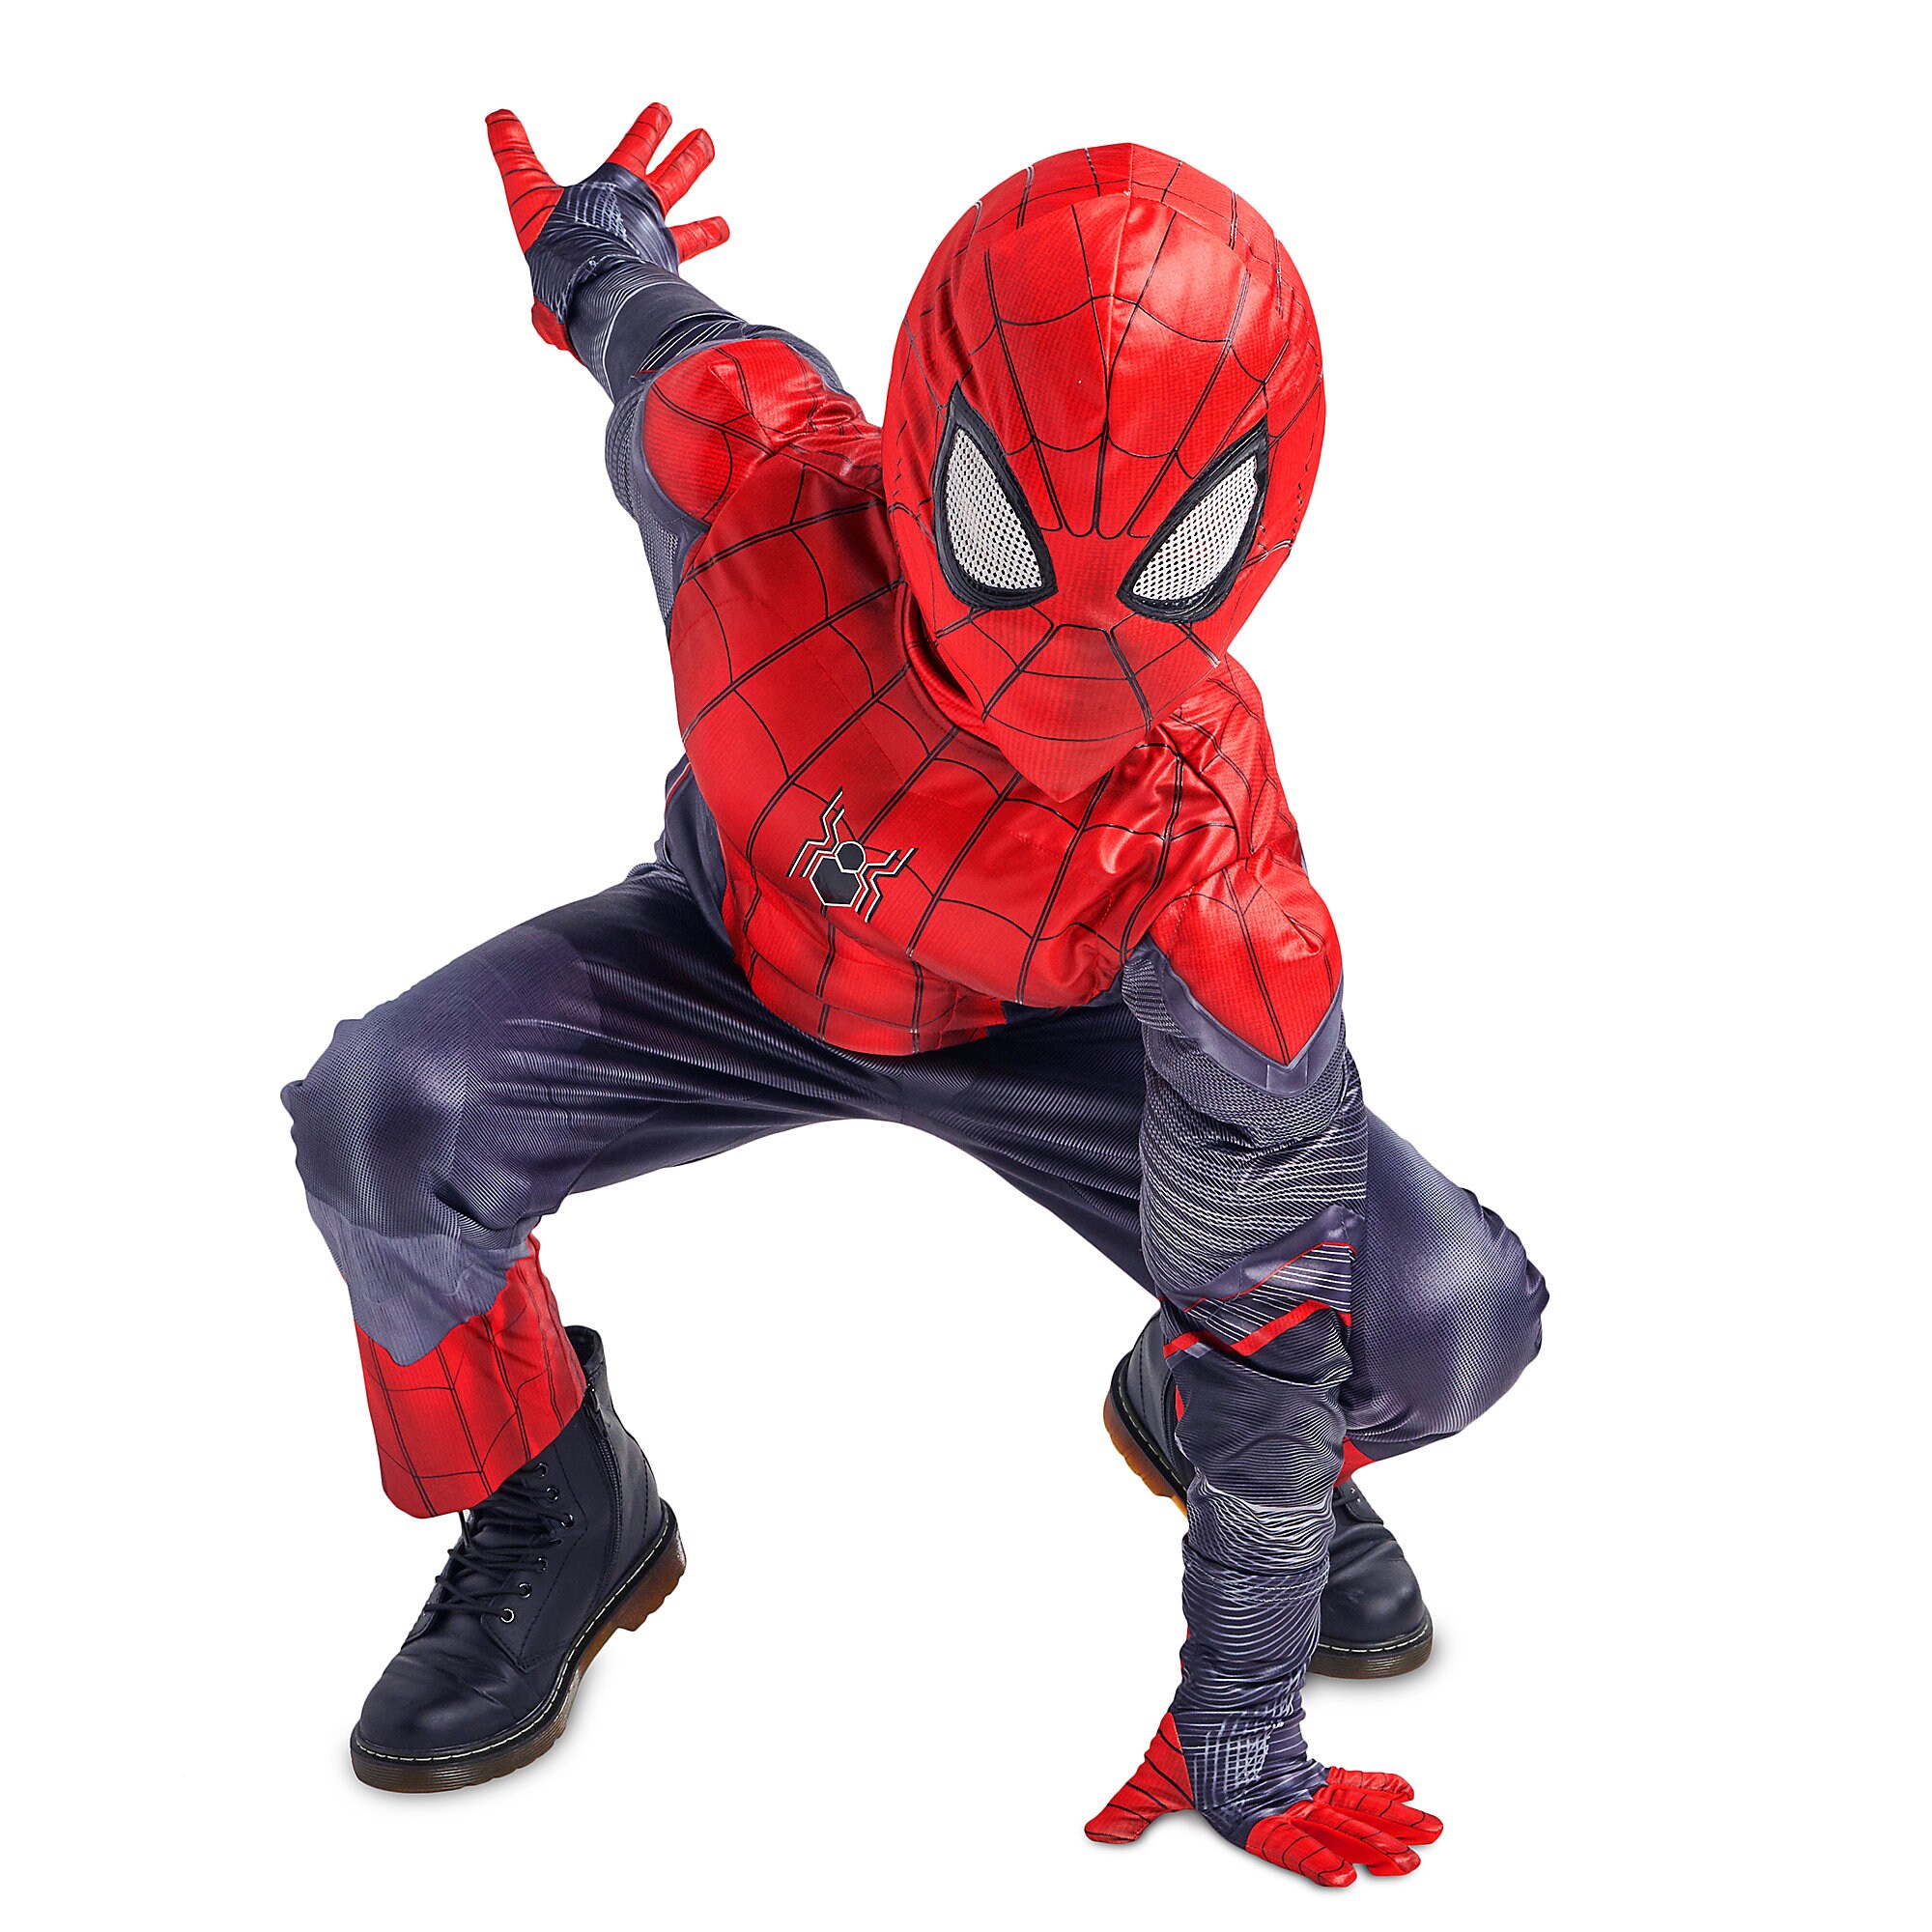 Spider-Man Costume Set for Kids - Spider-Man: Far from Home is now out ...